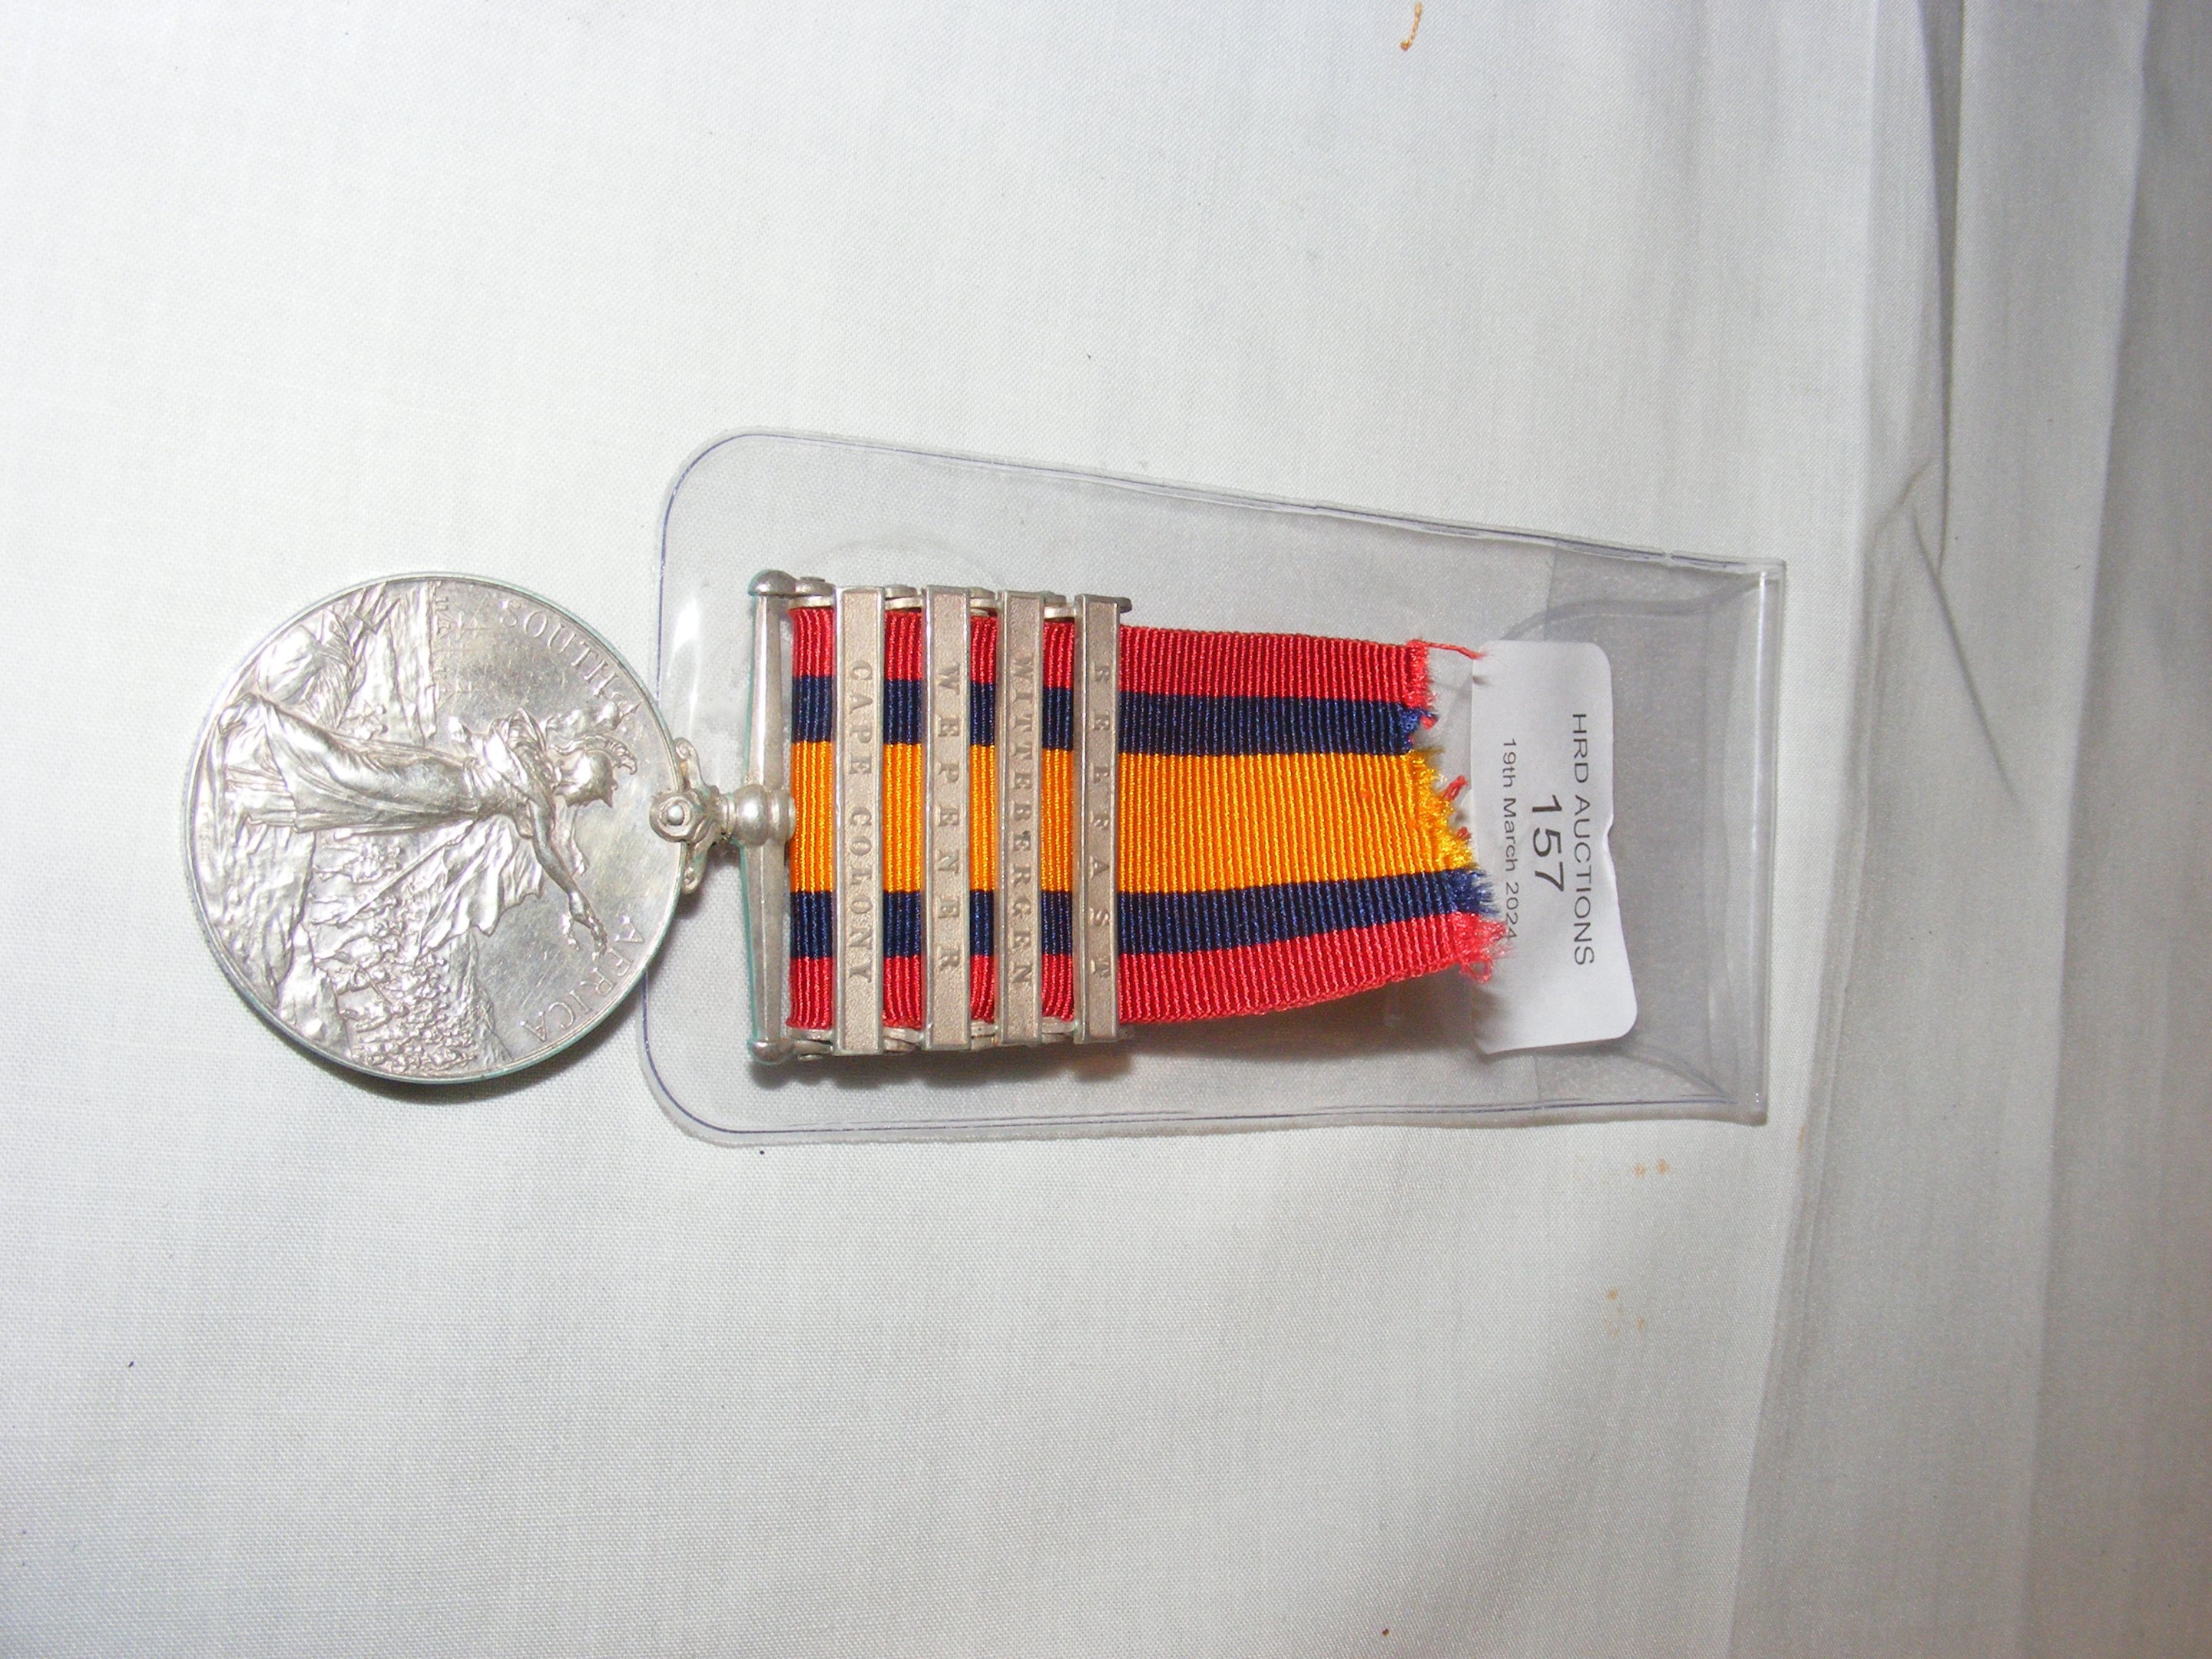 A full size original Queen's South Africa medal wi